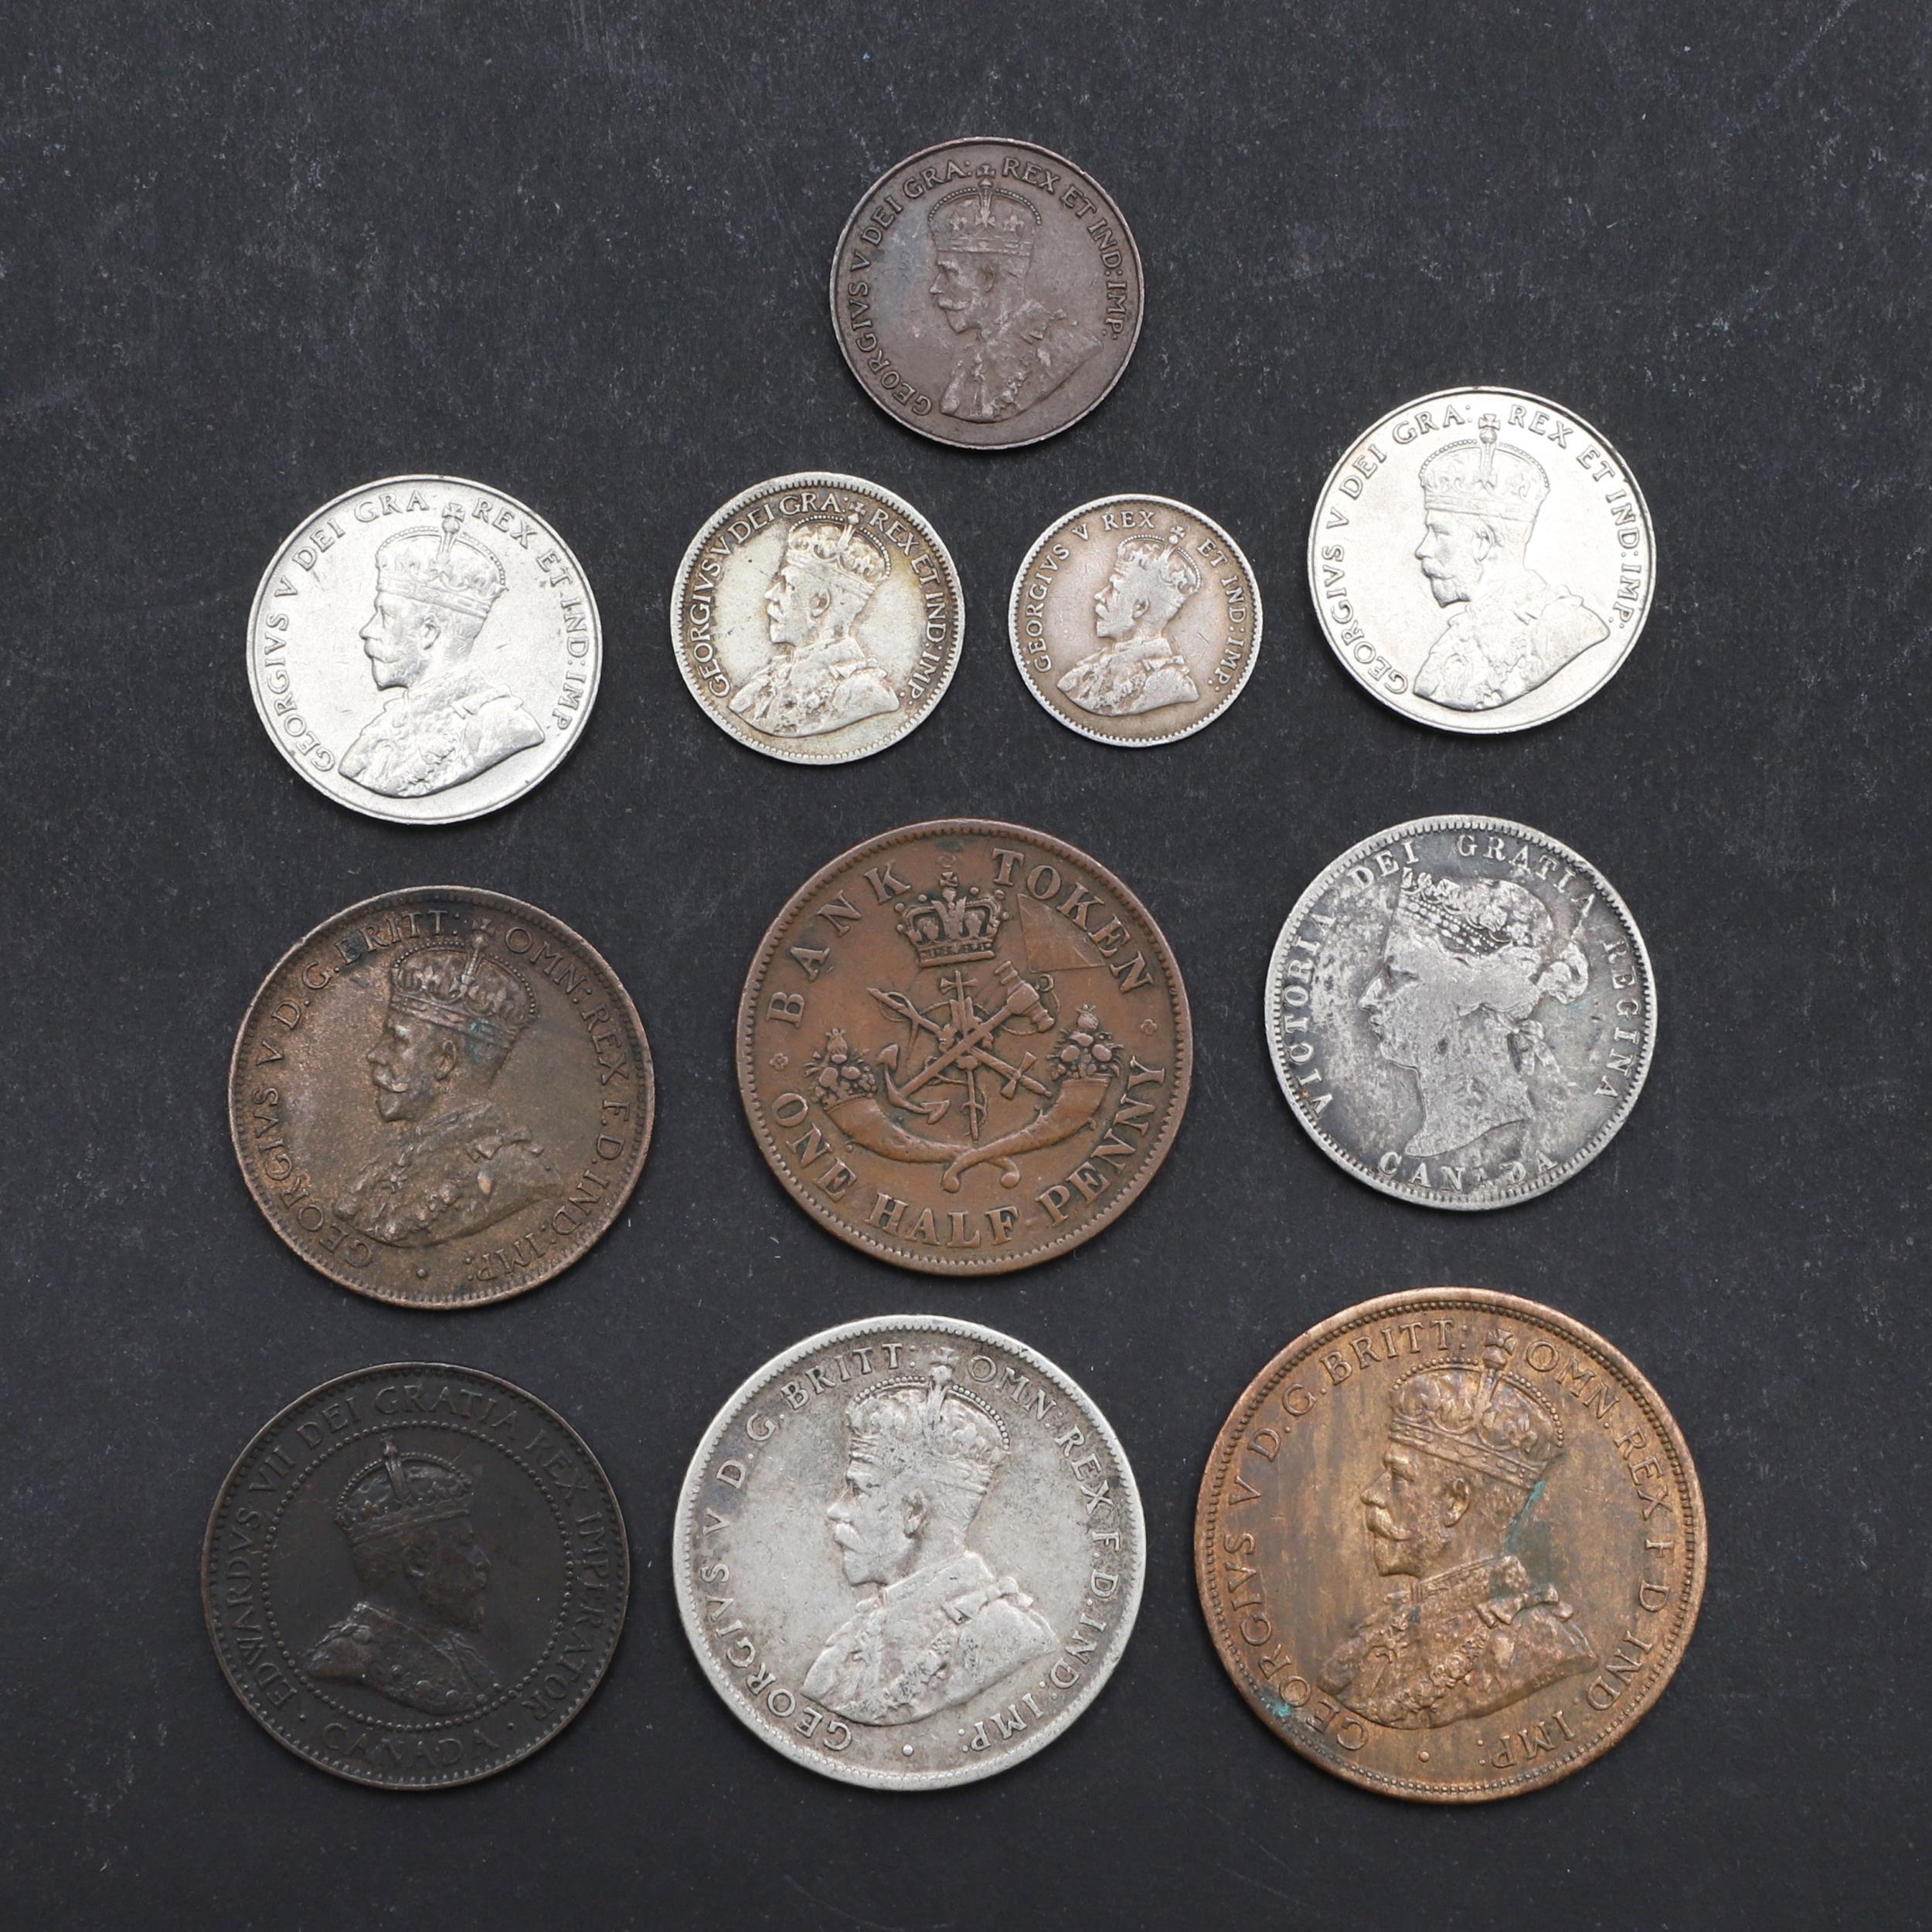 A SMALL COLLECTION OF CANADIAN AND AUSTRALIAN COINS.